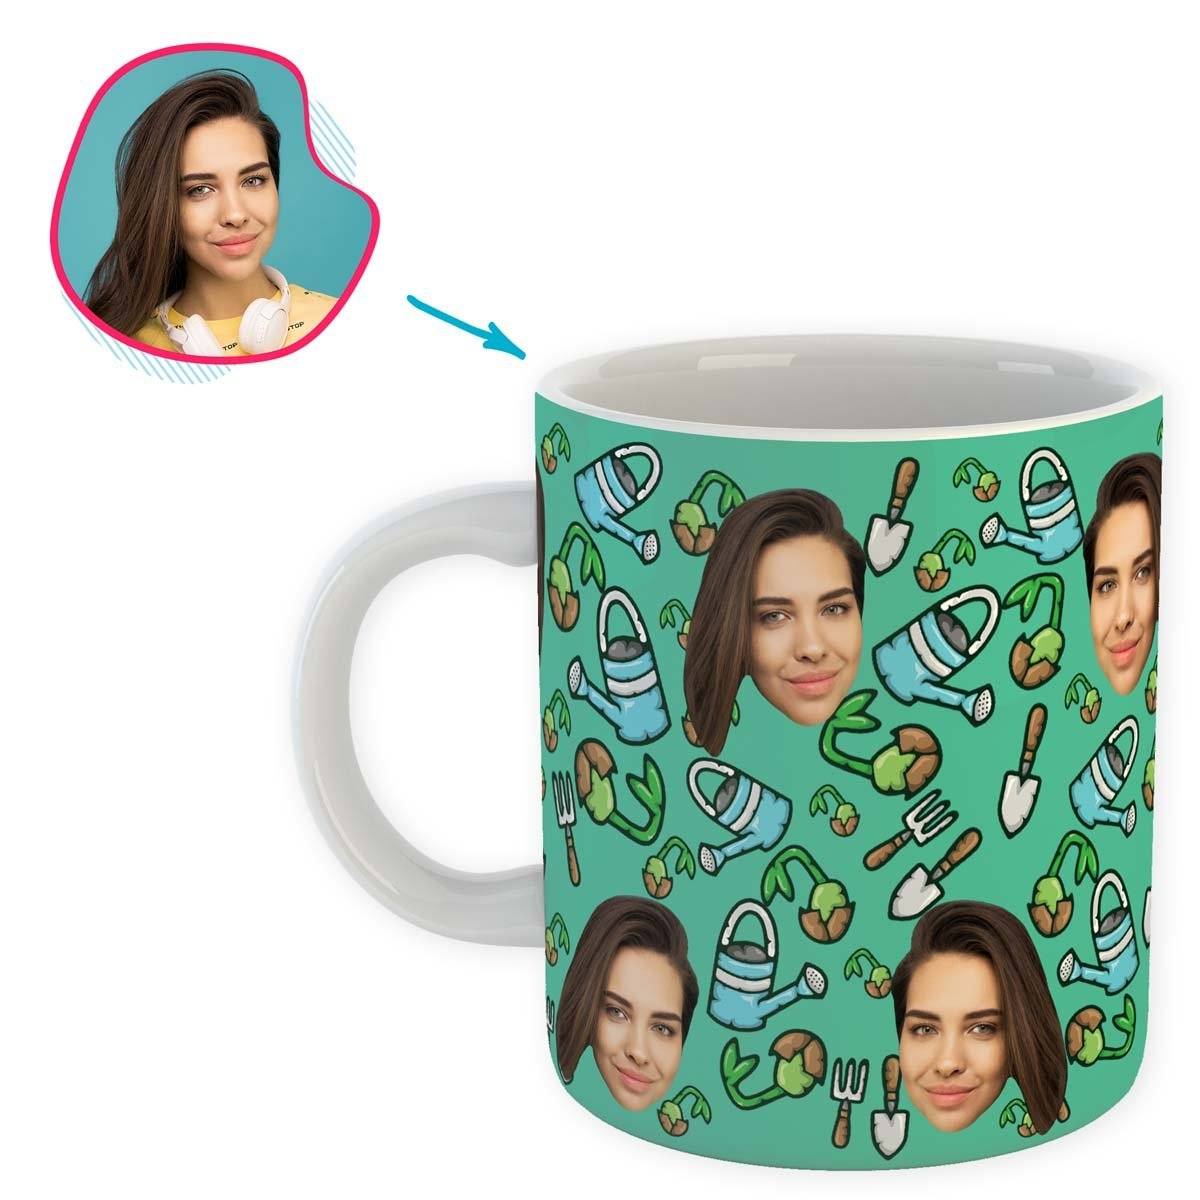 mint Gardening mug personalized with photo of face printed on it